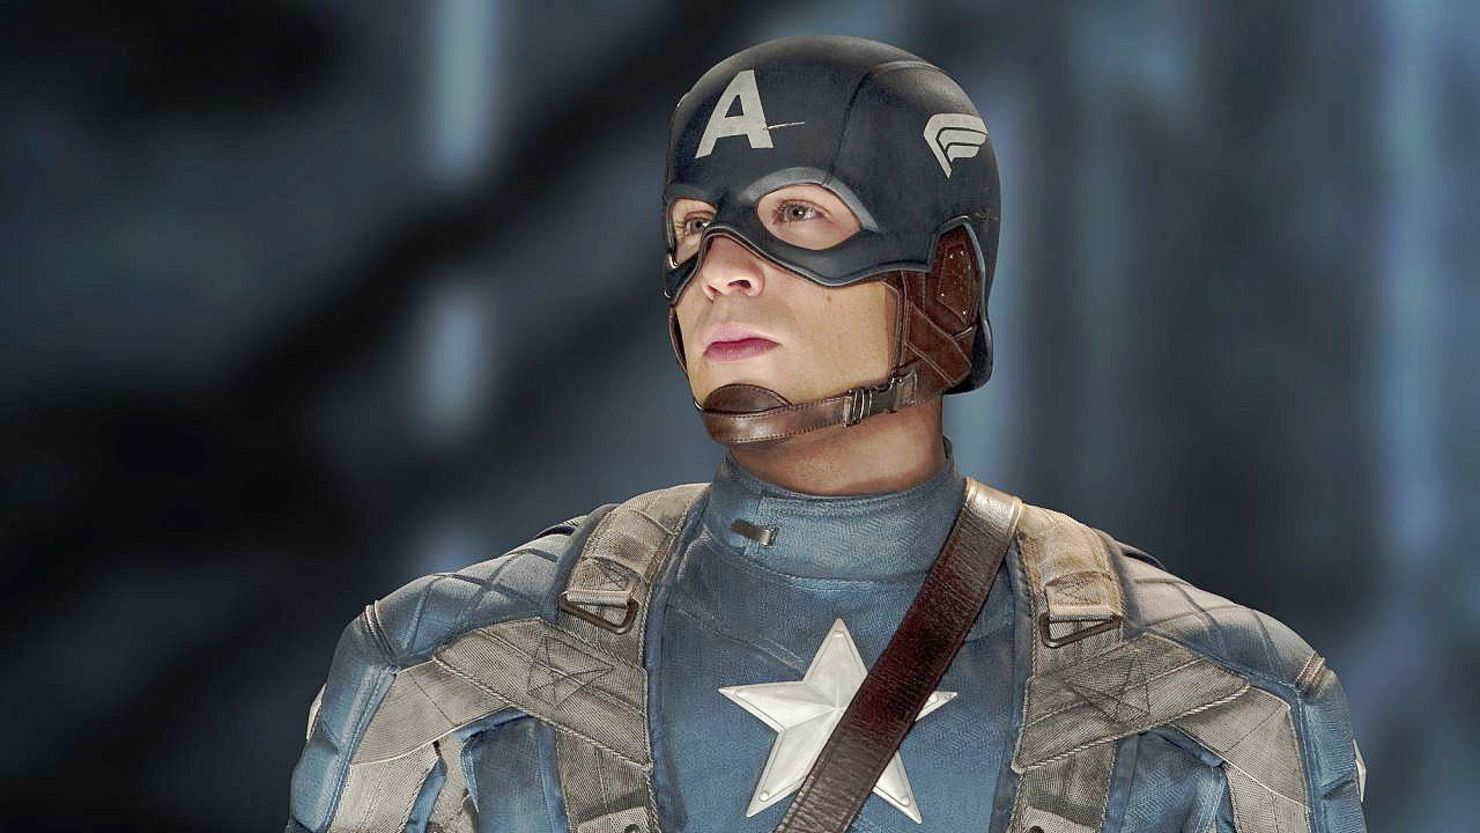 Chris Evans stars in "Captain America: The First Avenger" in 2011. Evans will star in the sequel set for April 2014.